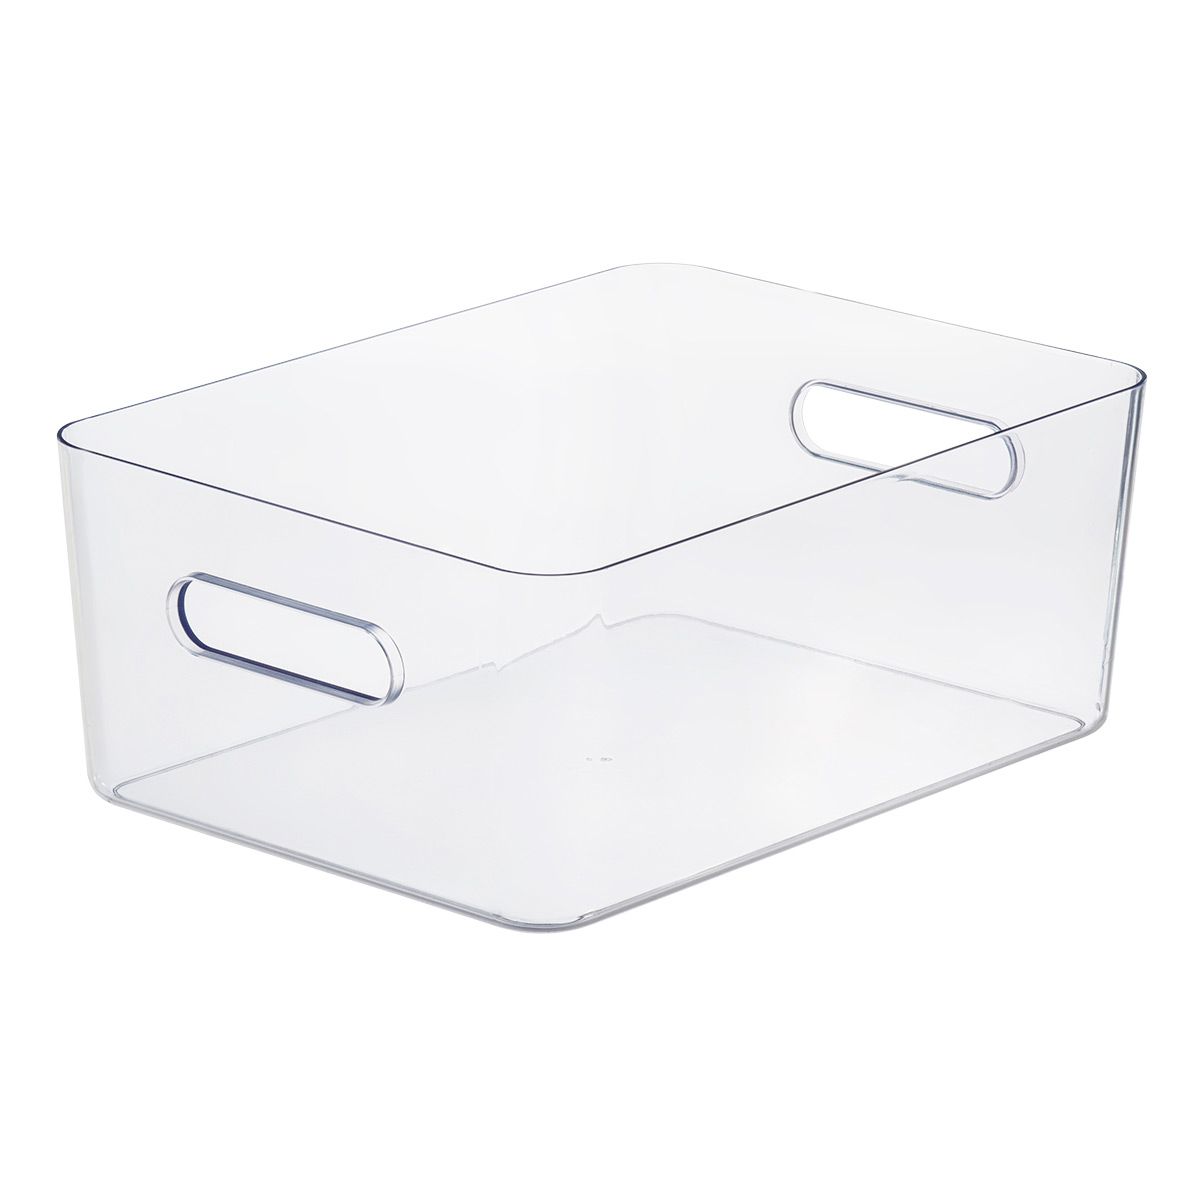 SmartStore Large Compact Plastic Bin w/ Handles Clear | The Container Store